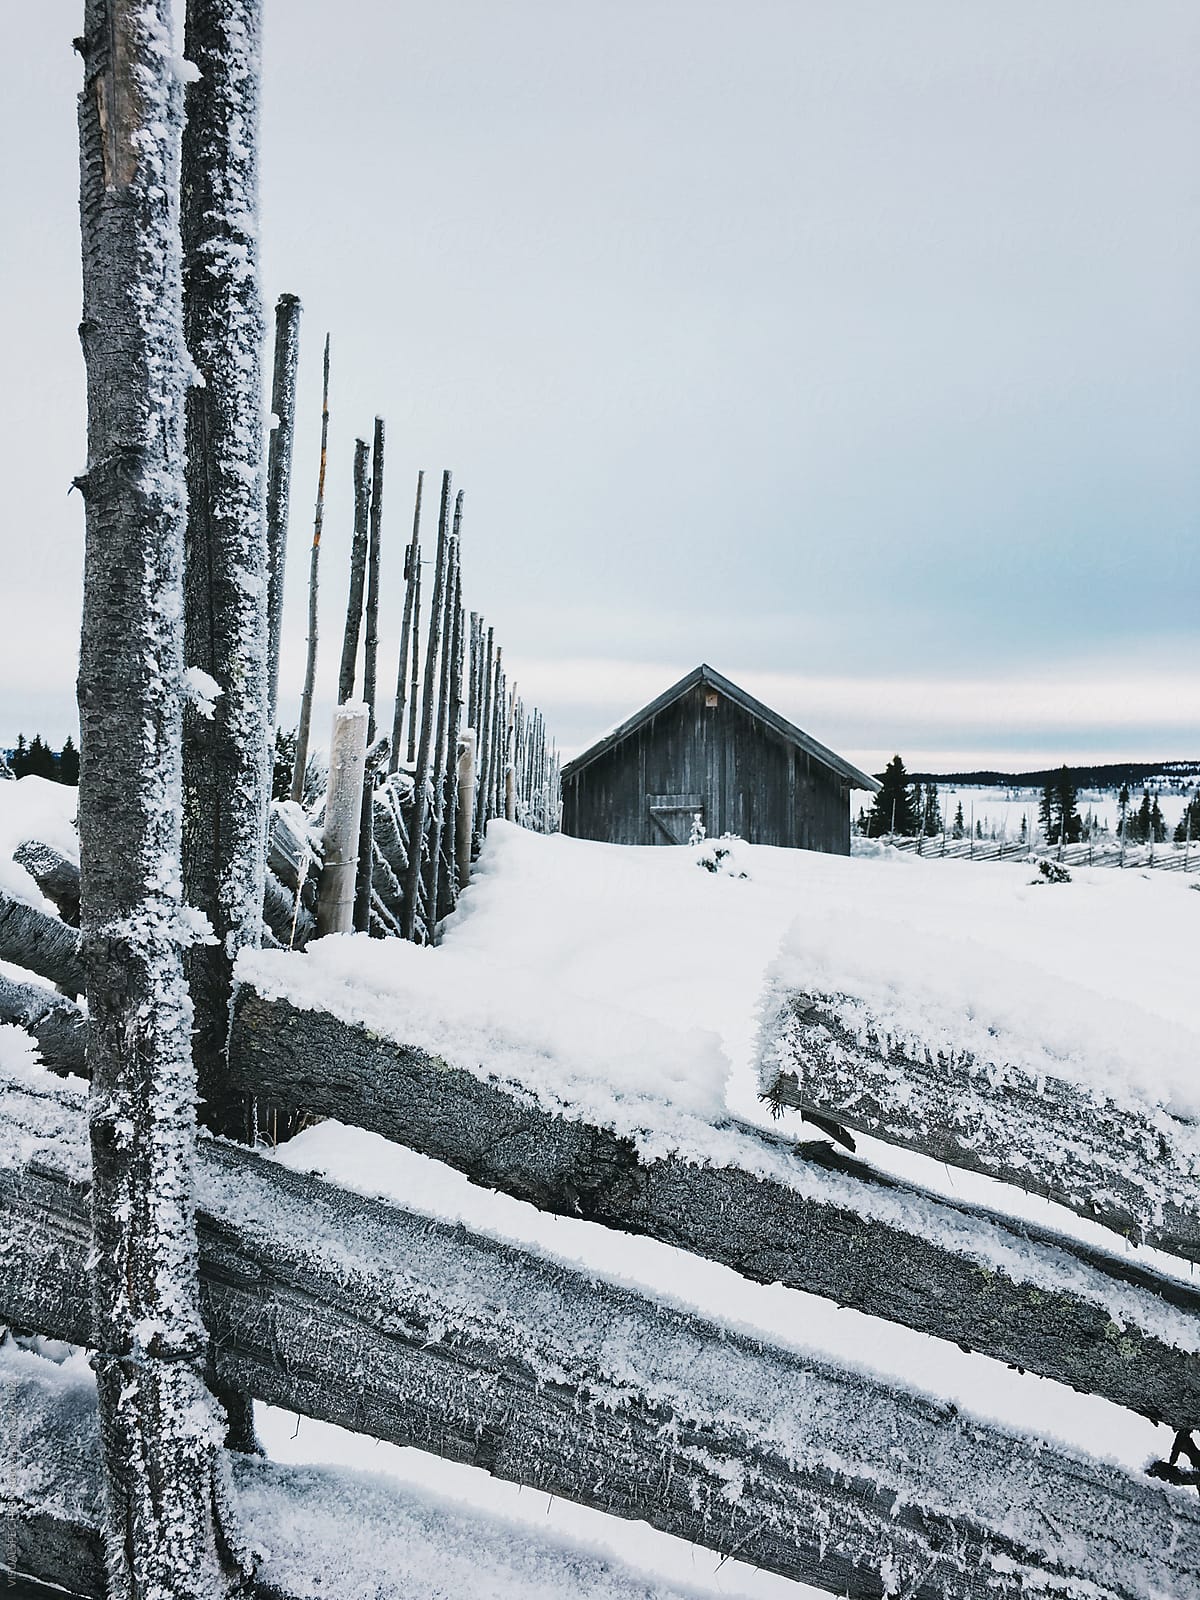 Wooden Fence and Cabin in White Scandinavian Winter Landscape